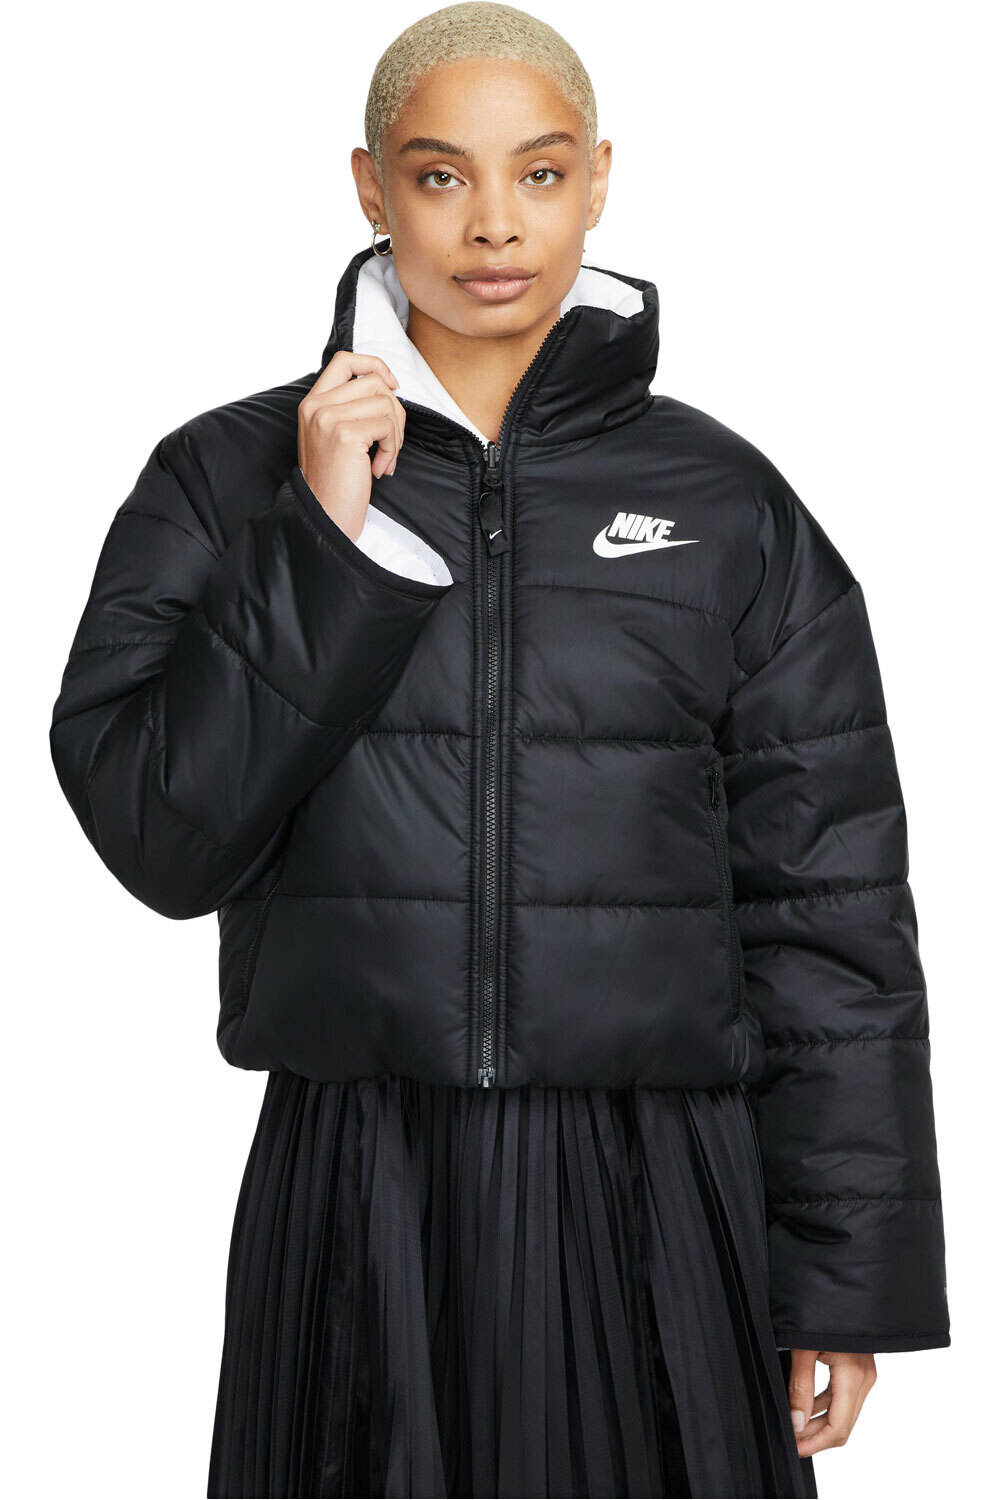 Nike chaquetas mujer NSW TF RPL CLSSC HD JKT vista frontal